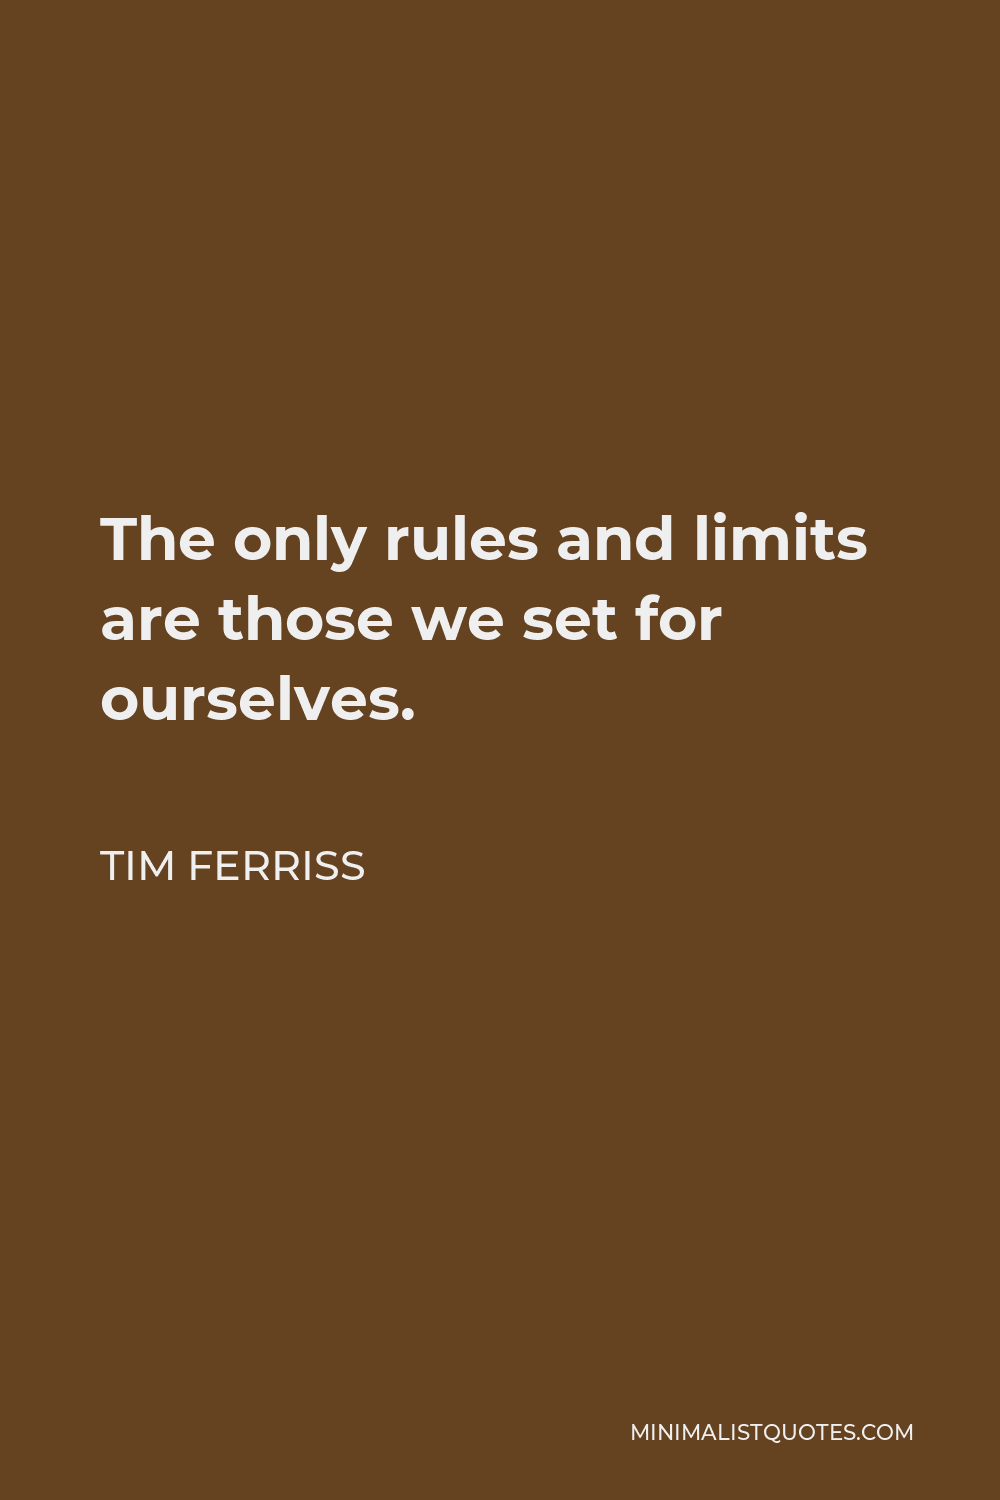 Tim Ferriss Quote - The only rules and limits are those we set for ourselves.